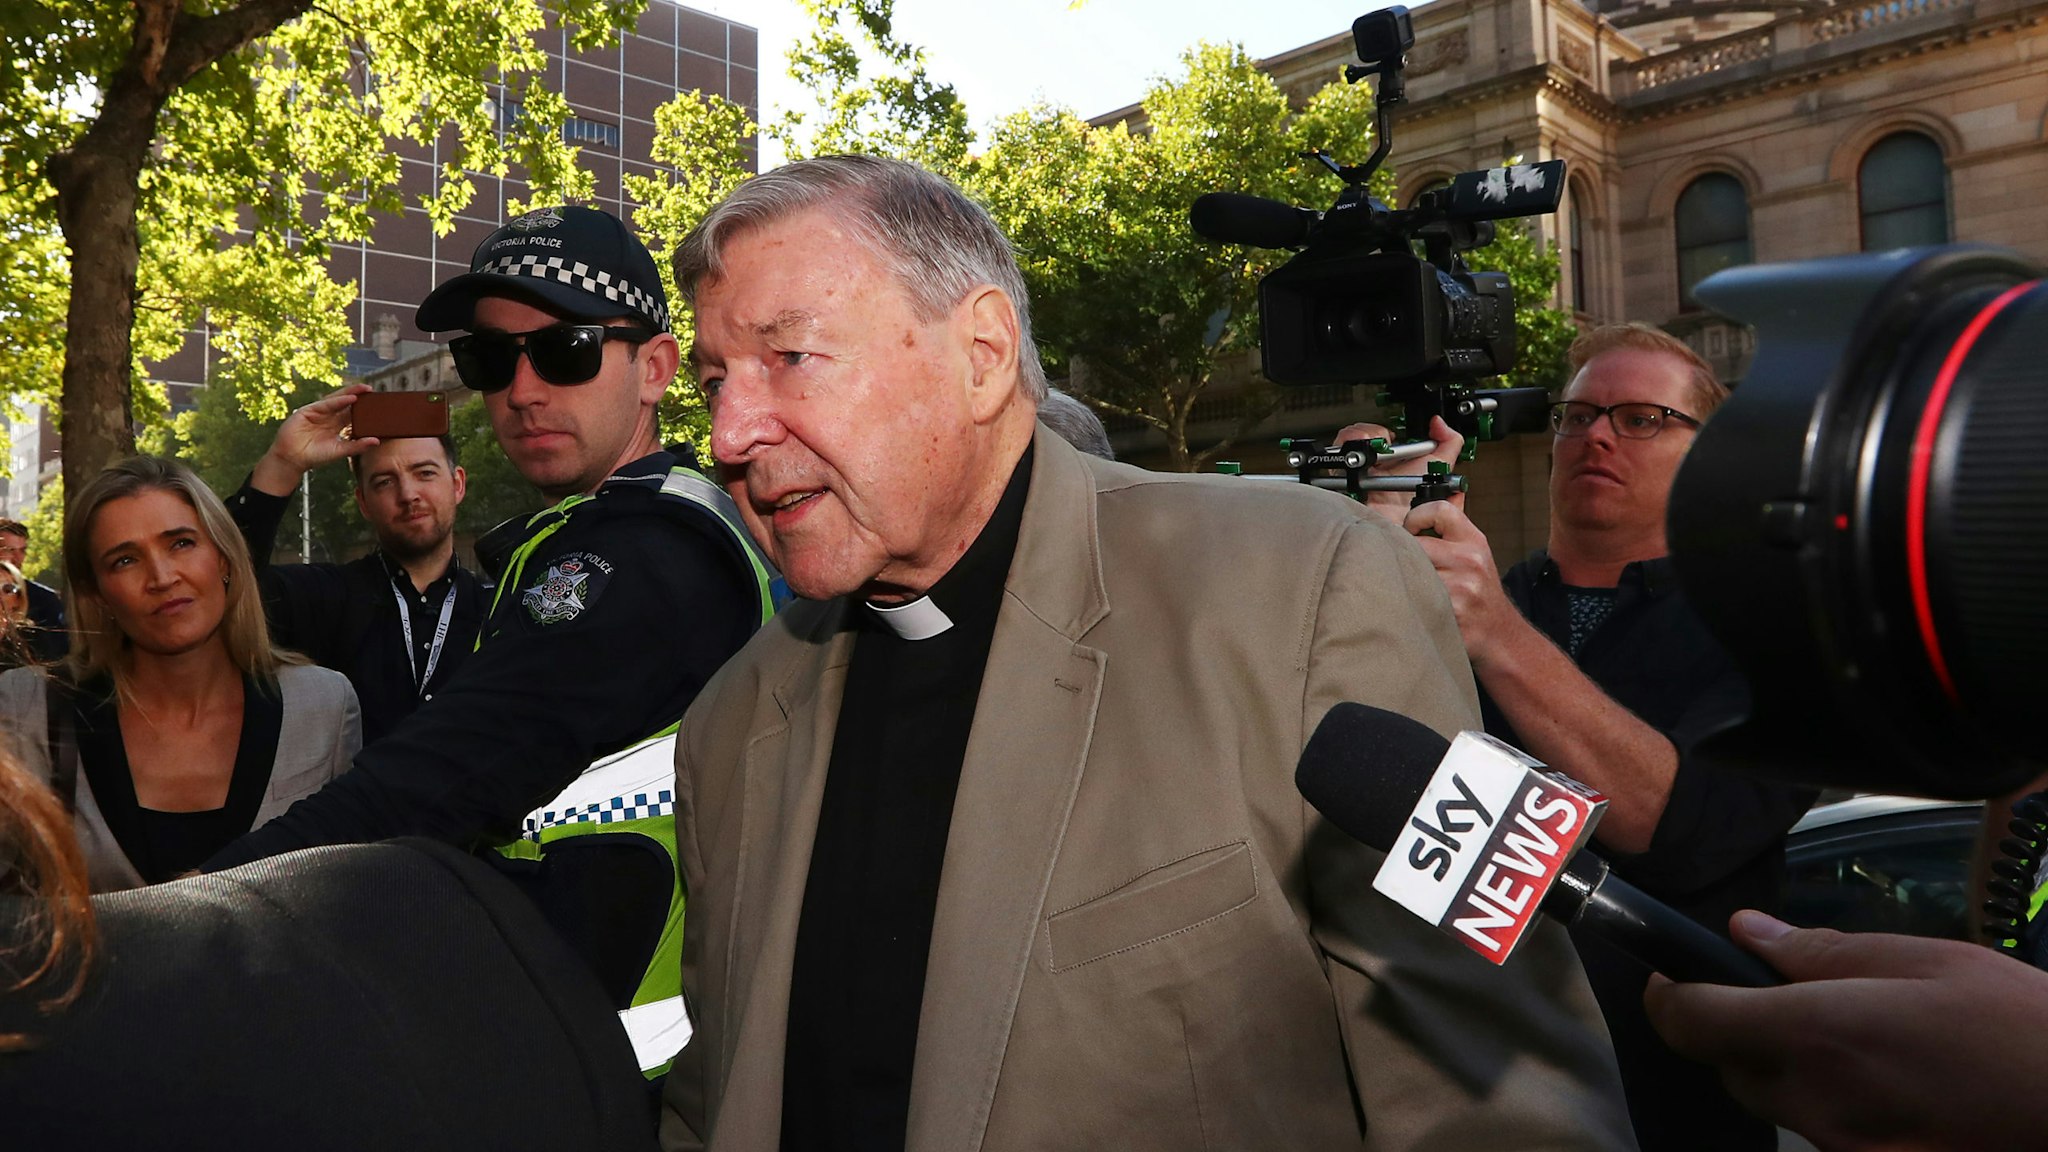 MELBOURNE, AUSTRALIA - FEBRUARY 27: Cardinal George Pell arrives at Melbourne County Court on February 27, 2019 in Melbourne, Australia. Pell, once the third most powerful man in the Vatican and Australia's most senior Catholic, was found guilty on 11 December in Melbourne's county court, but the result was subject to a suppression order and was only able to be reported from Tuesday. The jury was unanimous in their verdict, finding Pell guilty on five counts of child sexual assault in December 1996 and early 1997 at St Patrick's Cathedral. (Photo by Michael Dodge/Getty Images)